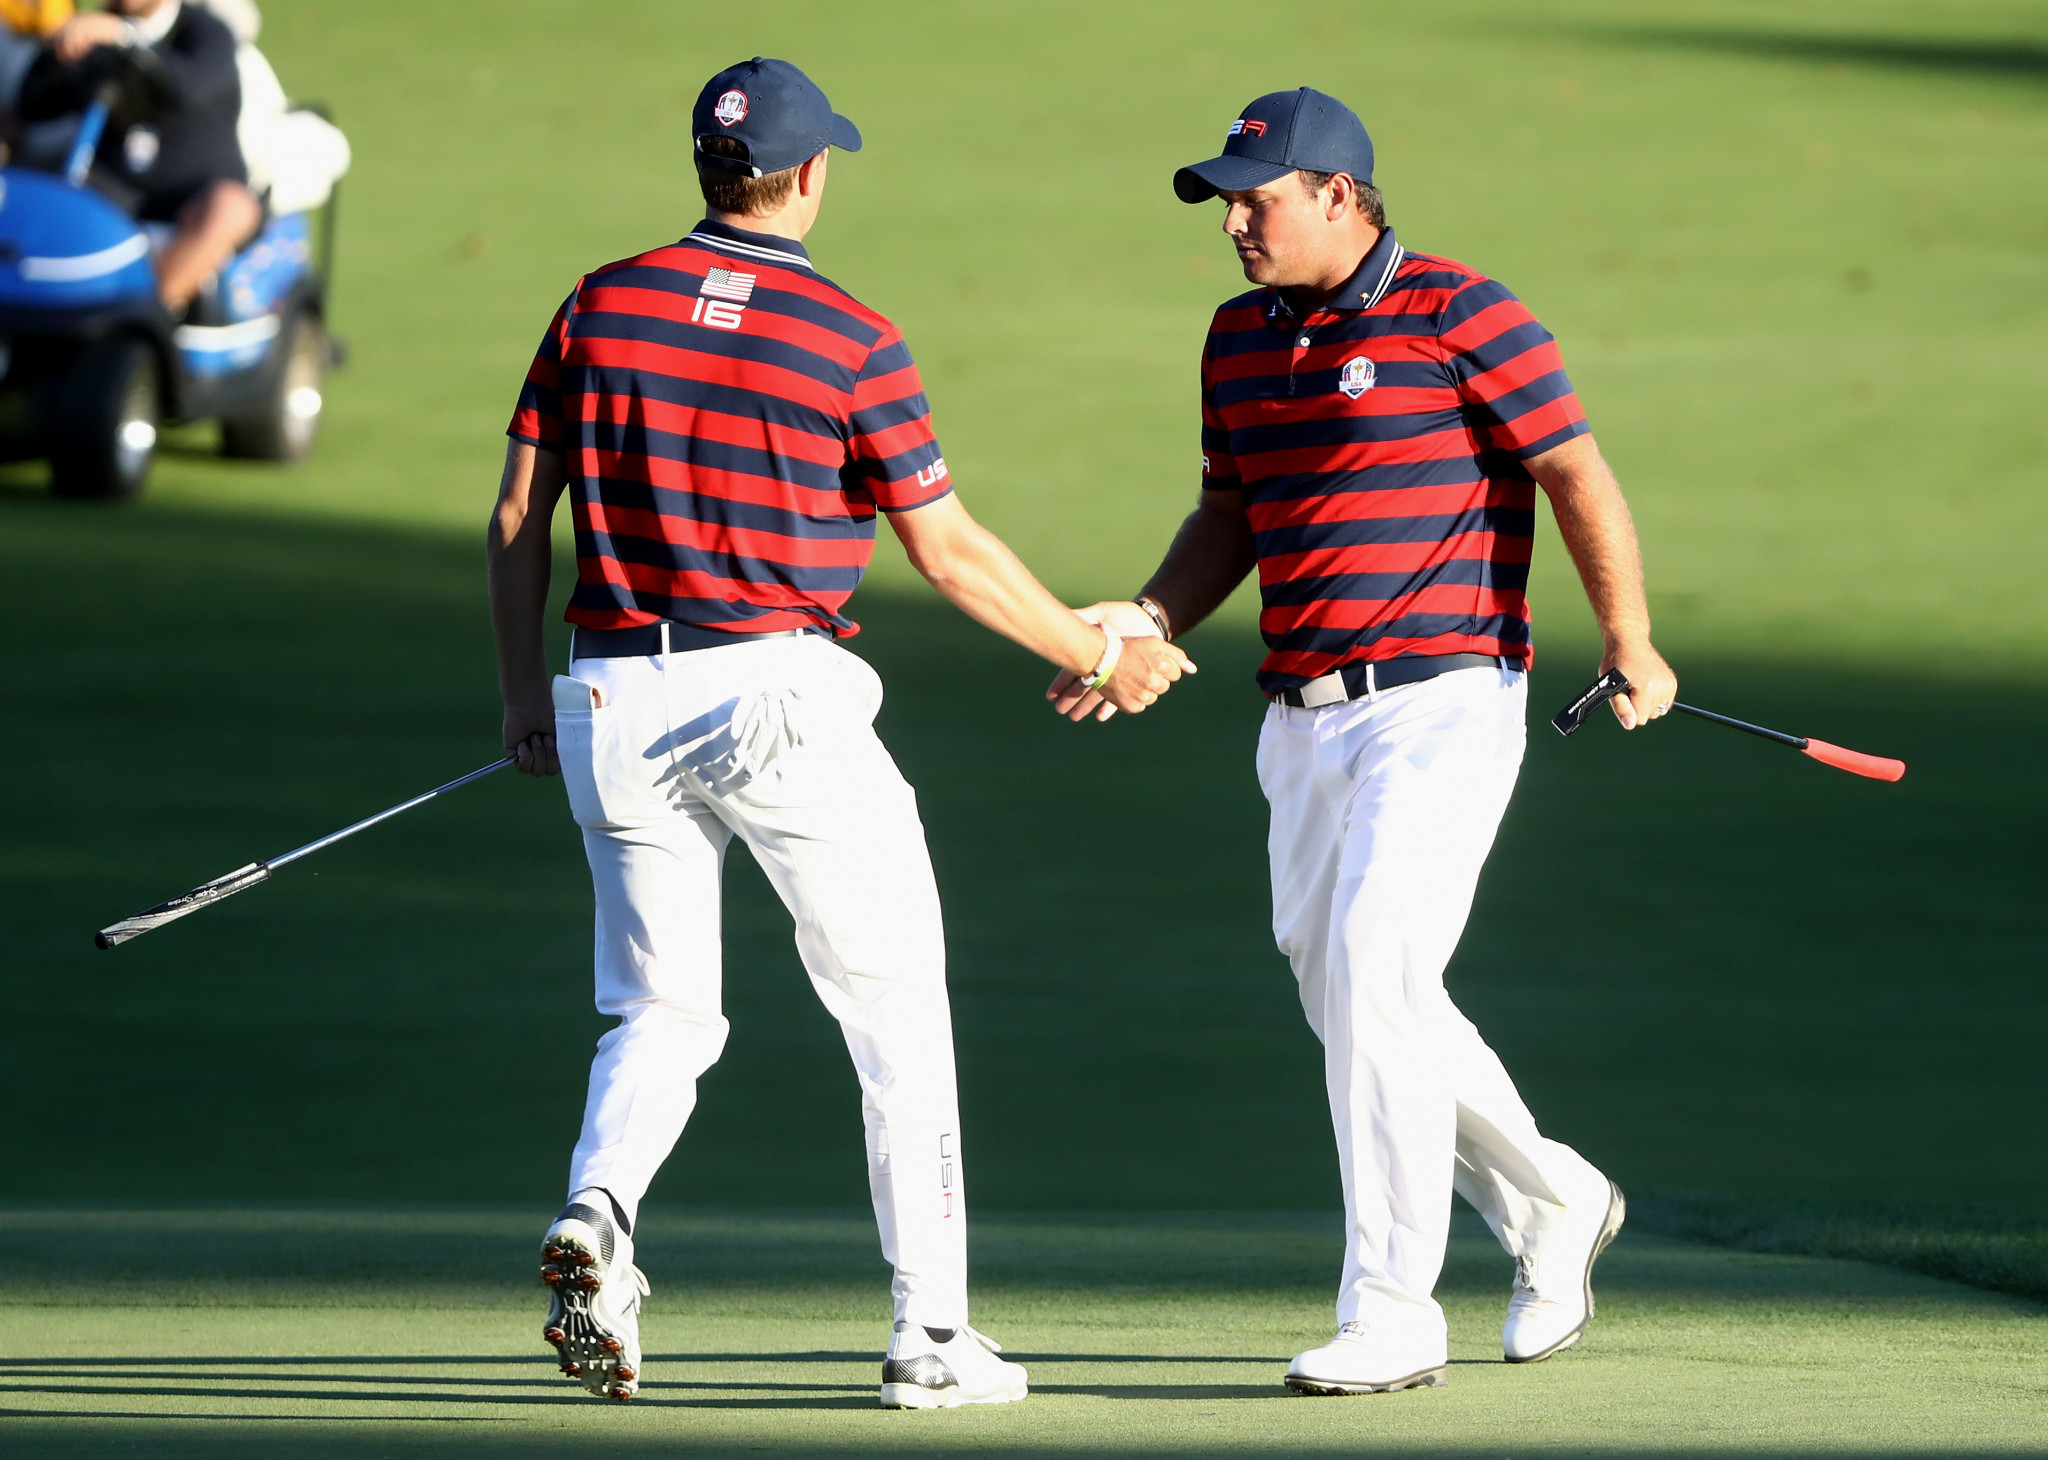 Jordan Spieth and Patrick Reed have often played together at the Ryder Cup but will be opponents this week ©Getty Images